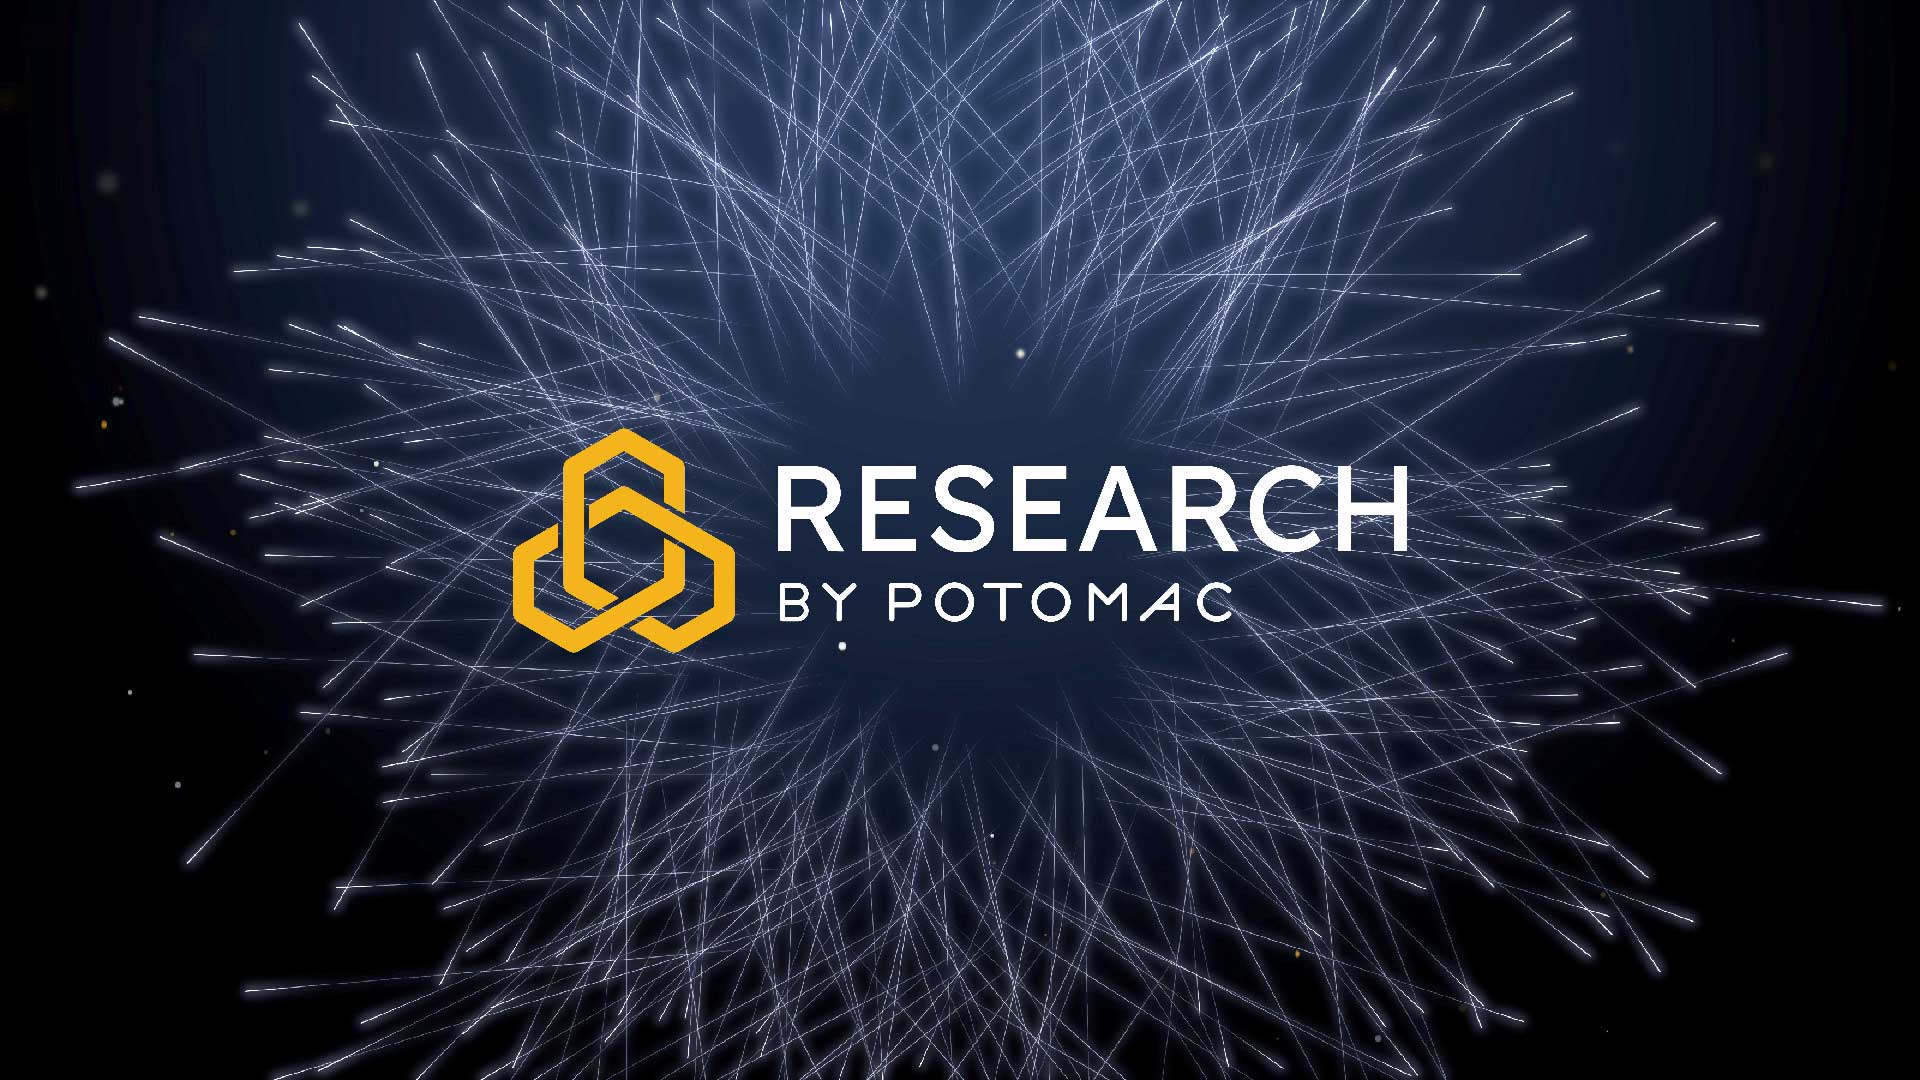 Research by Potomac Launch Day